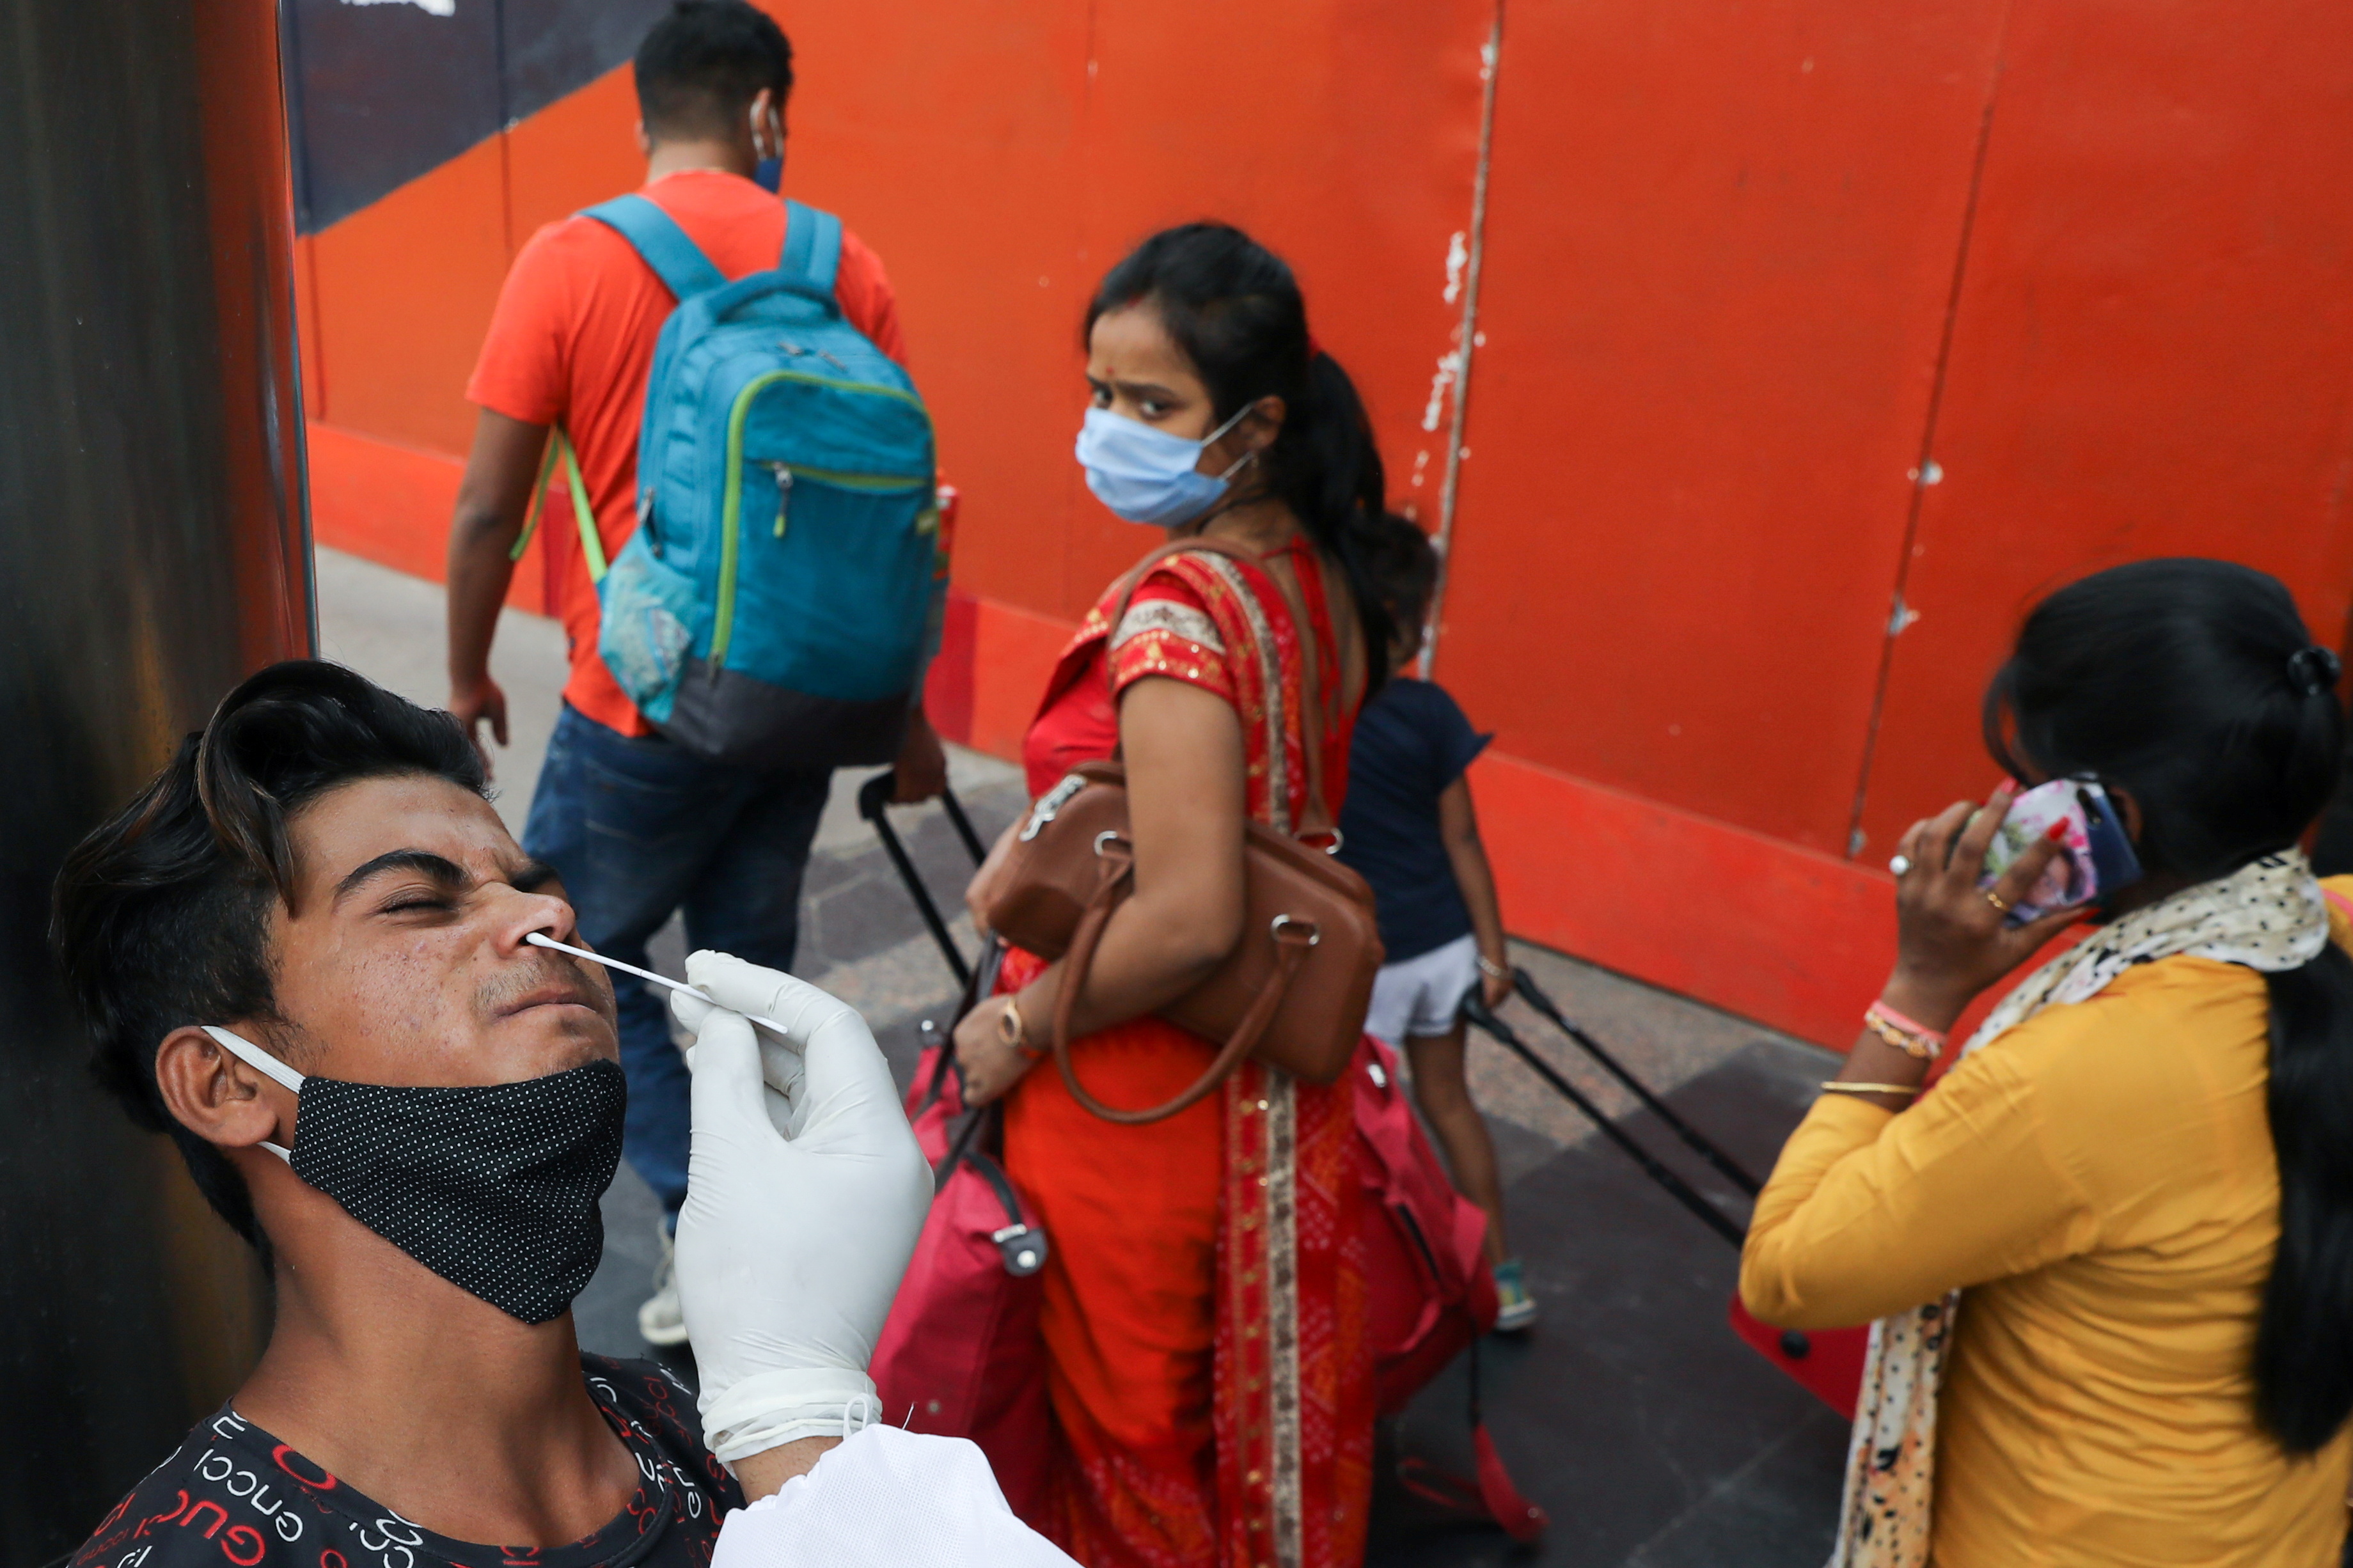 A man reacts as a healthcare worker collects a swab sample, amidst the spread of the coronavirus disease (COVID-19), at a railway station, in New Delhi, India, April 7, 2021. REUTERS/Anushree Fadnavis    